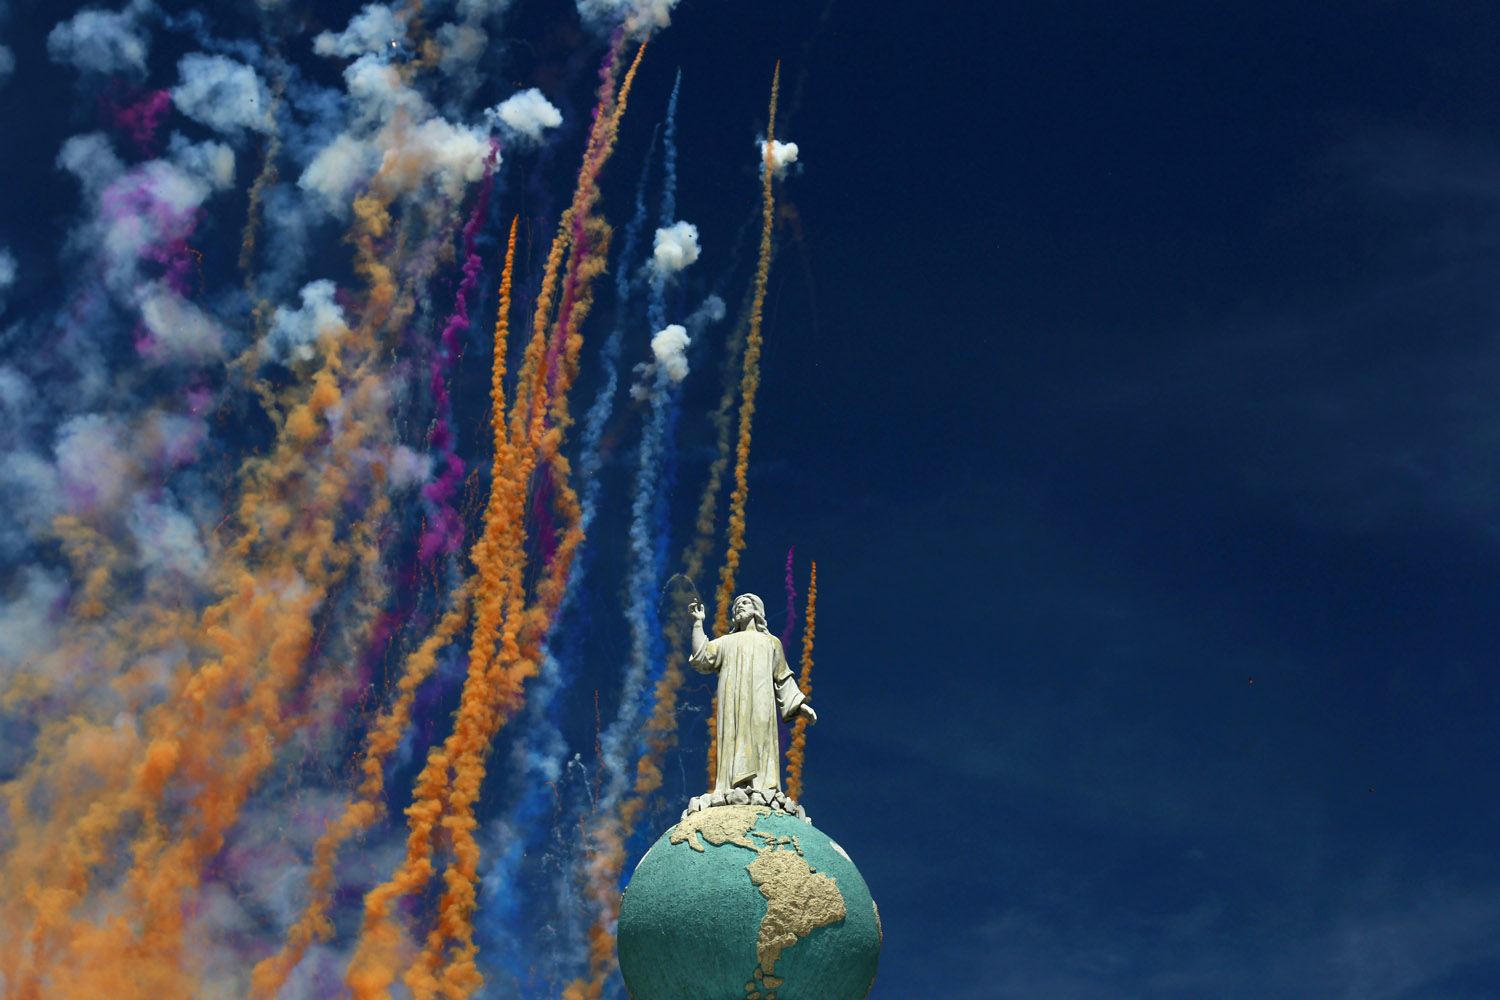 Aug. 1, 2013. Fireworks are seen behind the Divino Salvador del Mundo monument during  Agostinas  (in allusion to the August month) religious celebrations in San Salvador.